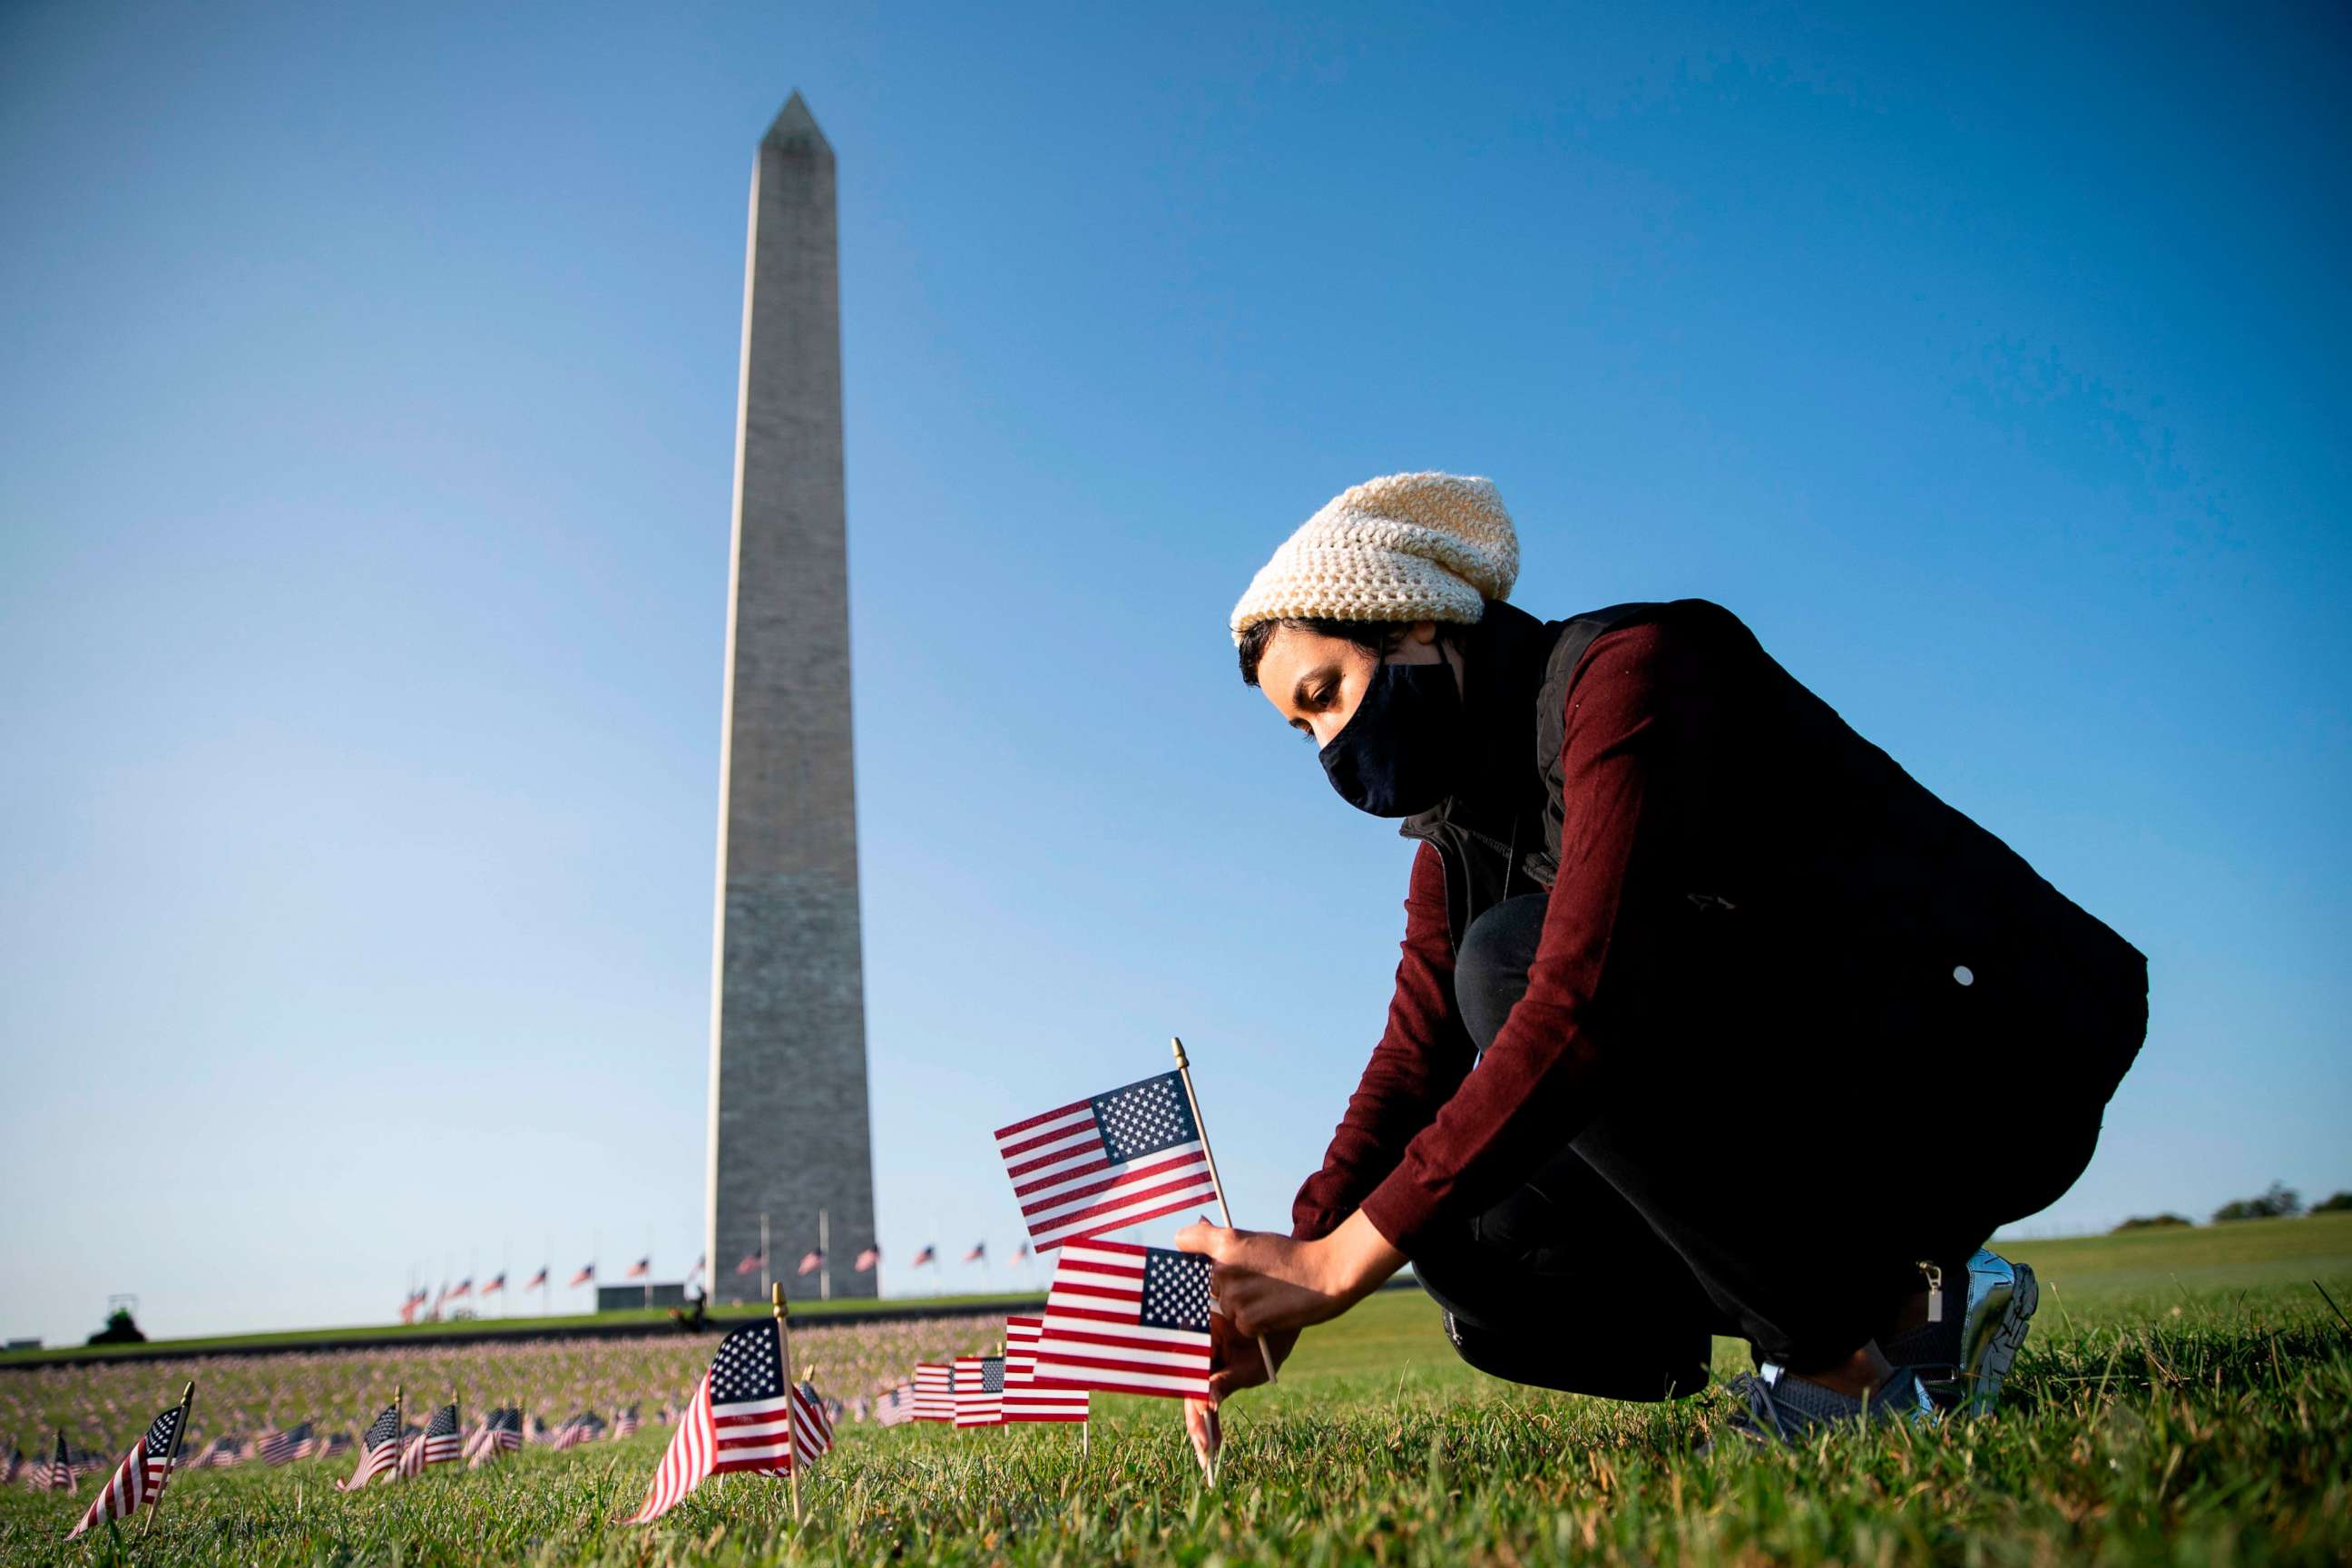 PHOTO: A woman places an American flag at a memorial for those who have died from COVID-19 on the National Mall in Washington, D.C., on Sept. 22, 2020.